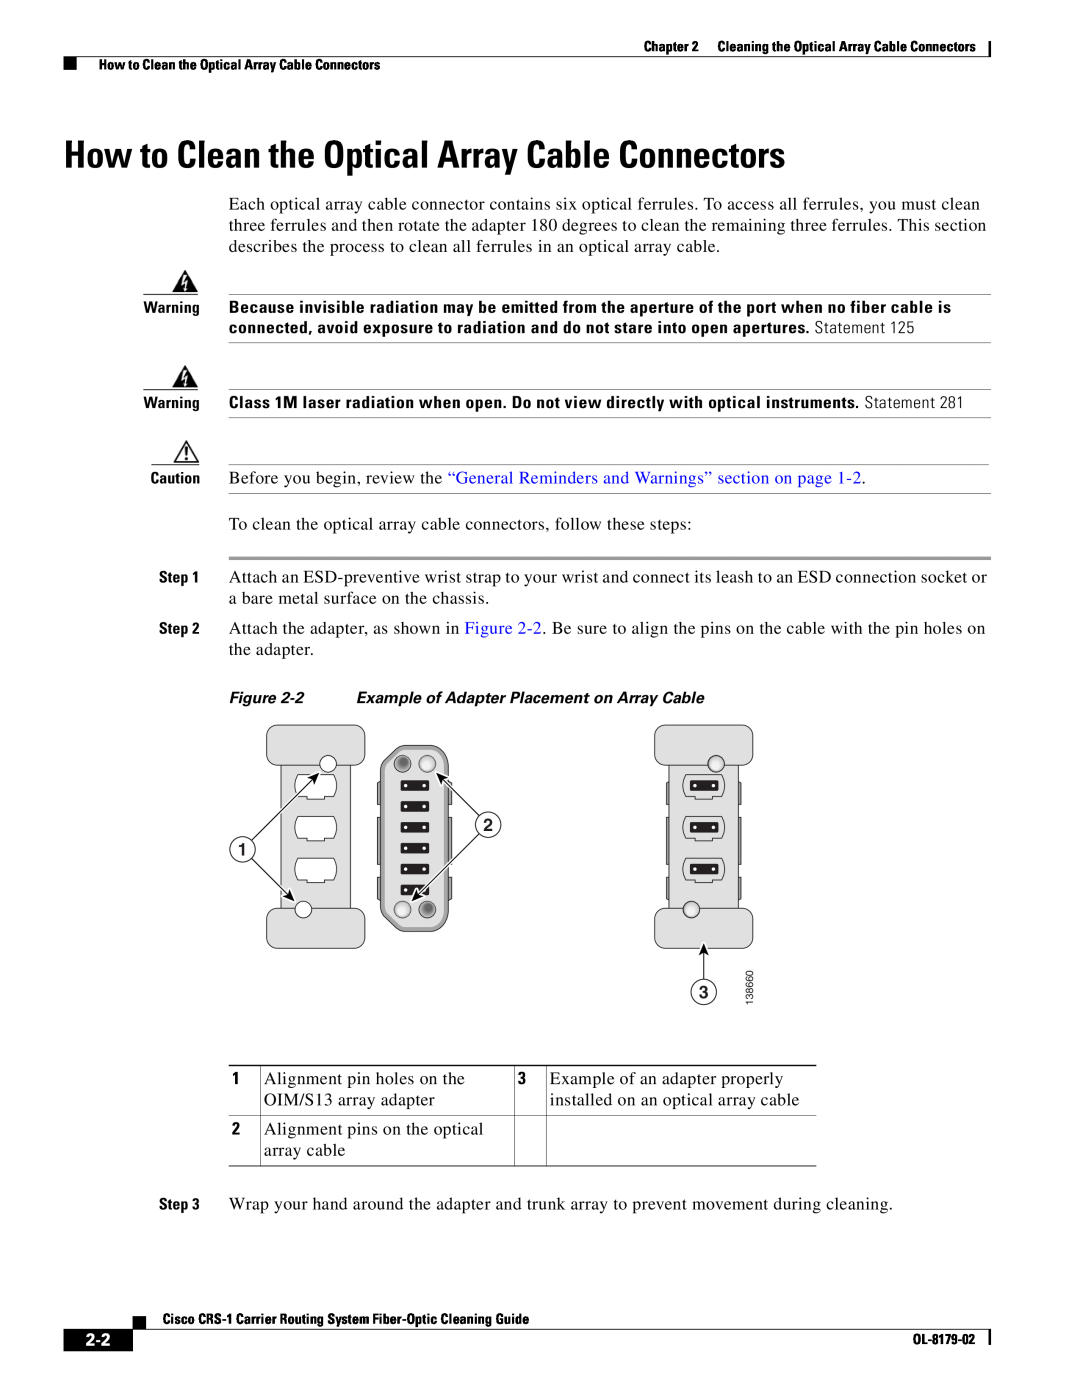 Cisco Systems CRS-1 manual How to Clean the Optical Array Cable Connectors 